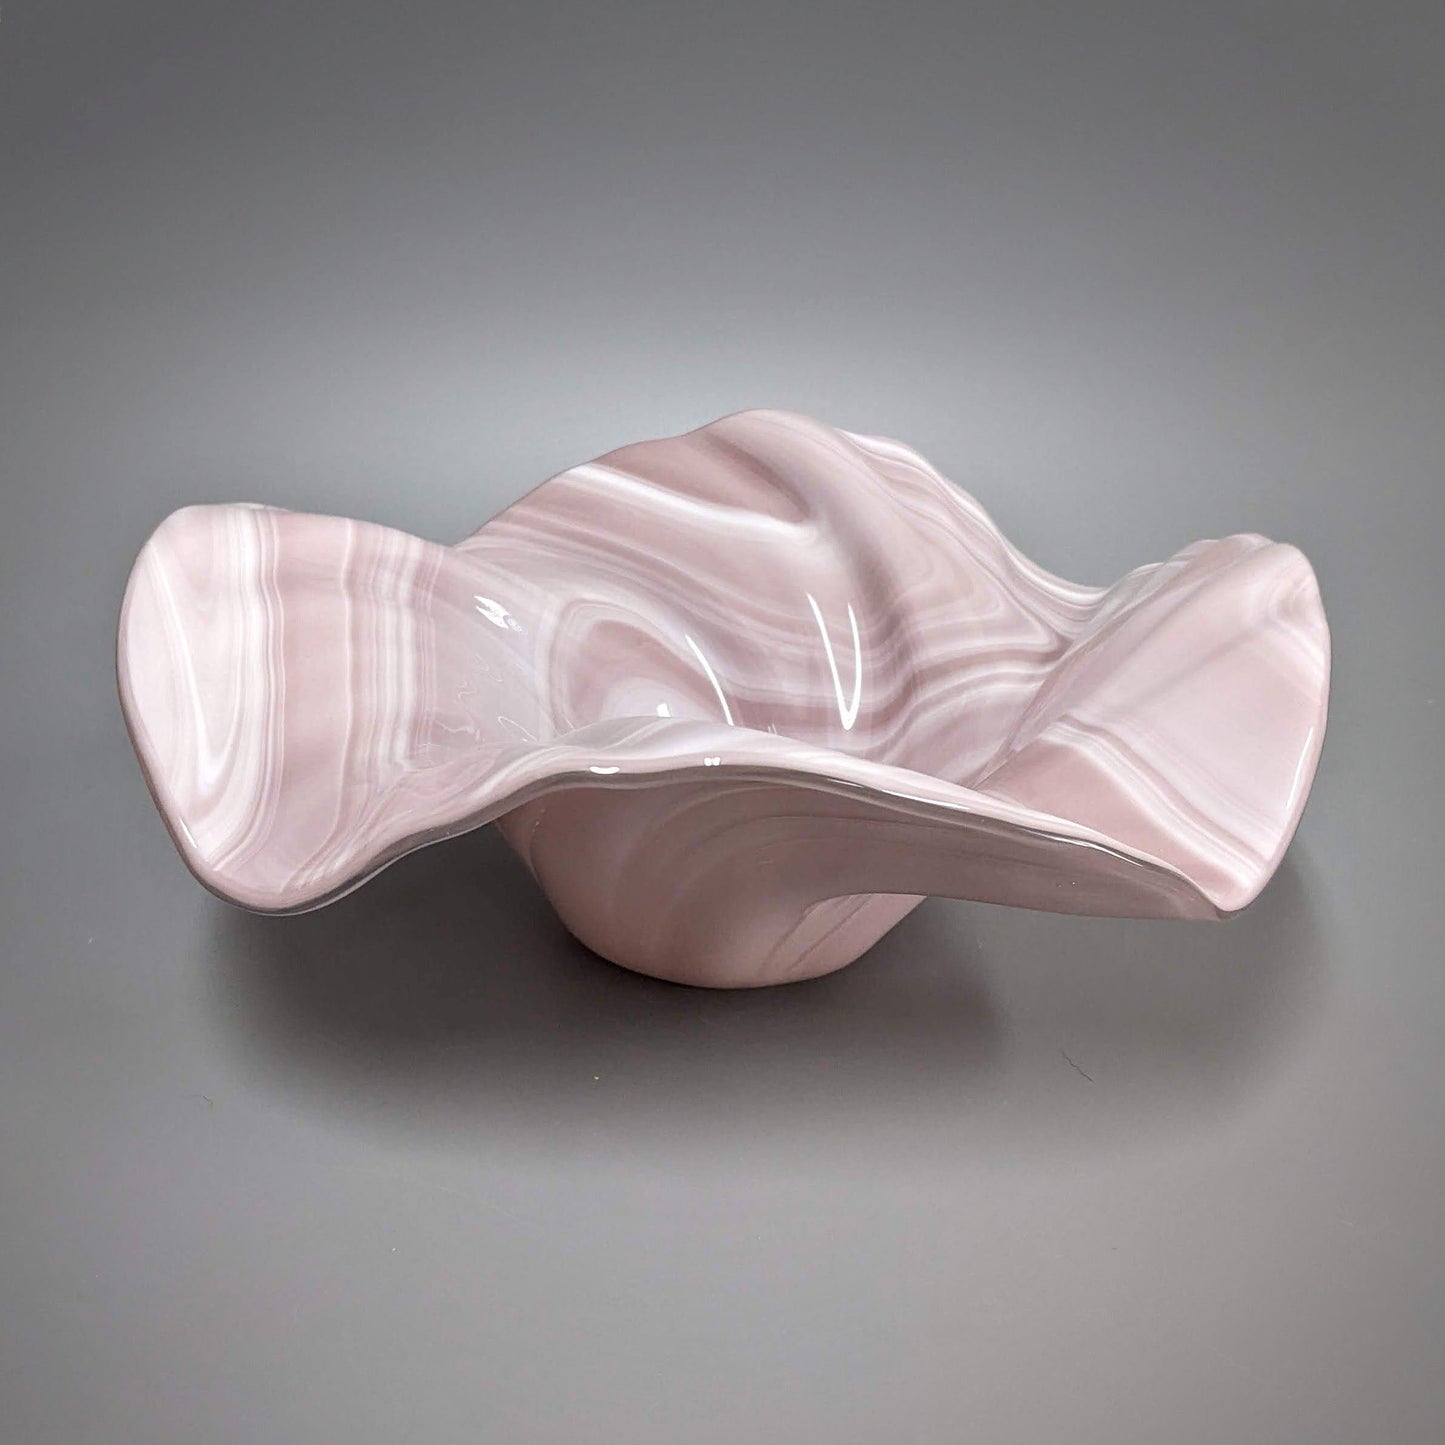 Glass Art Wave Bowl in Pink Mauve White